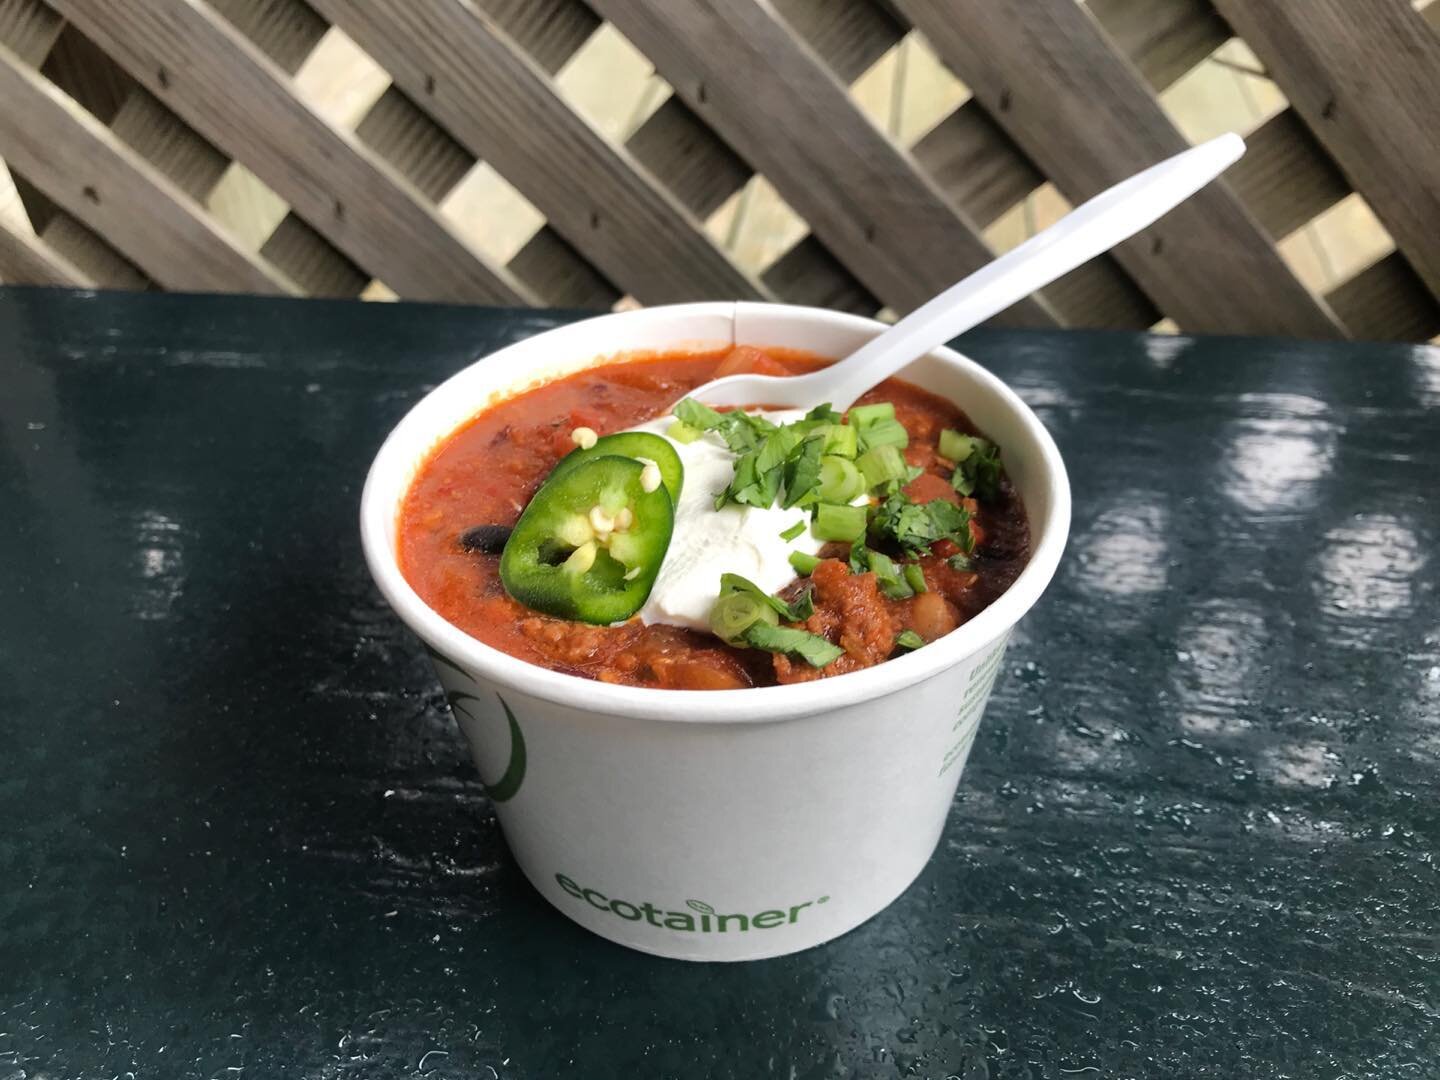 Come grab a bowl of Spicy Beef and Bean Chili. Order ahead online or at the kiosk on the porch.